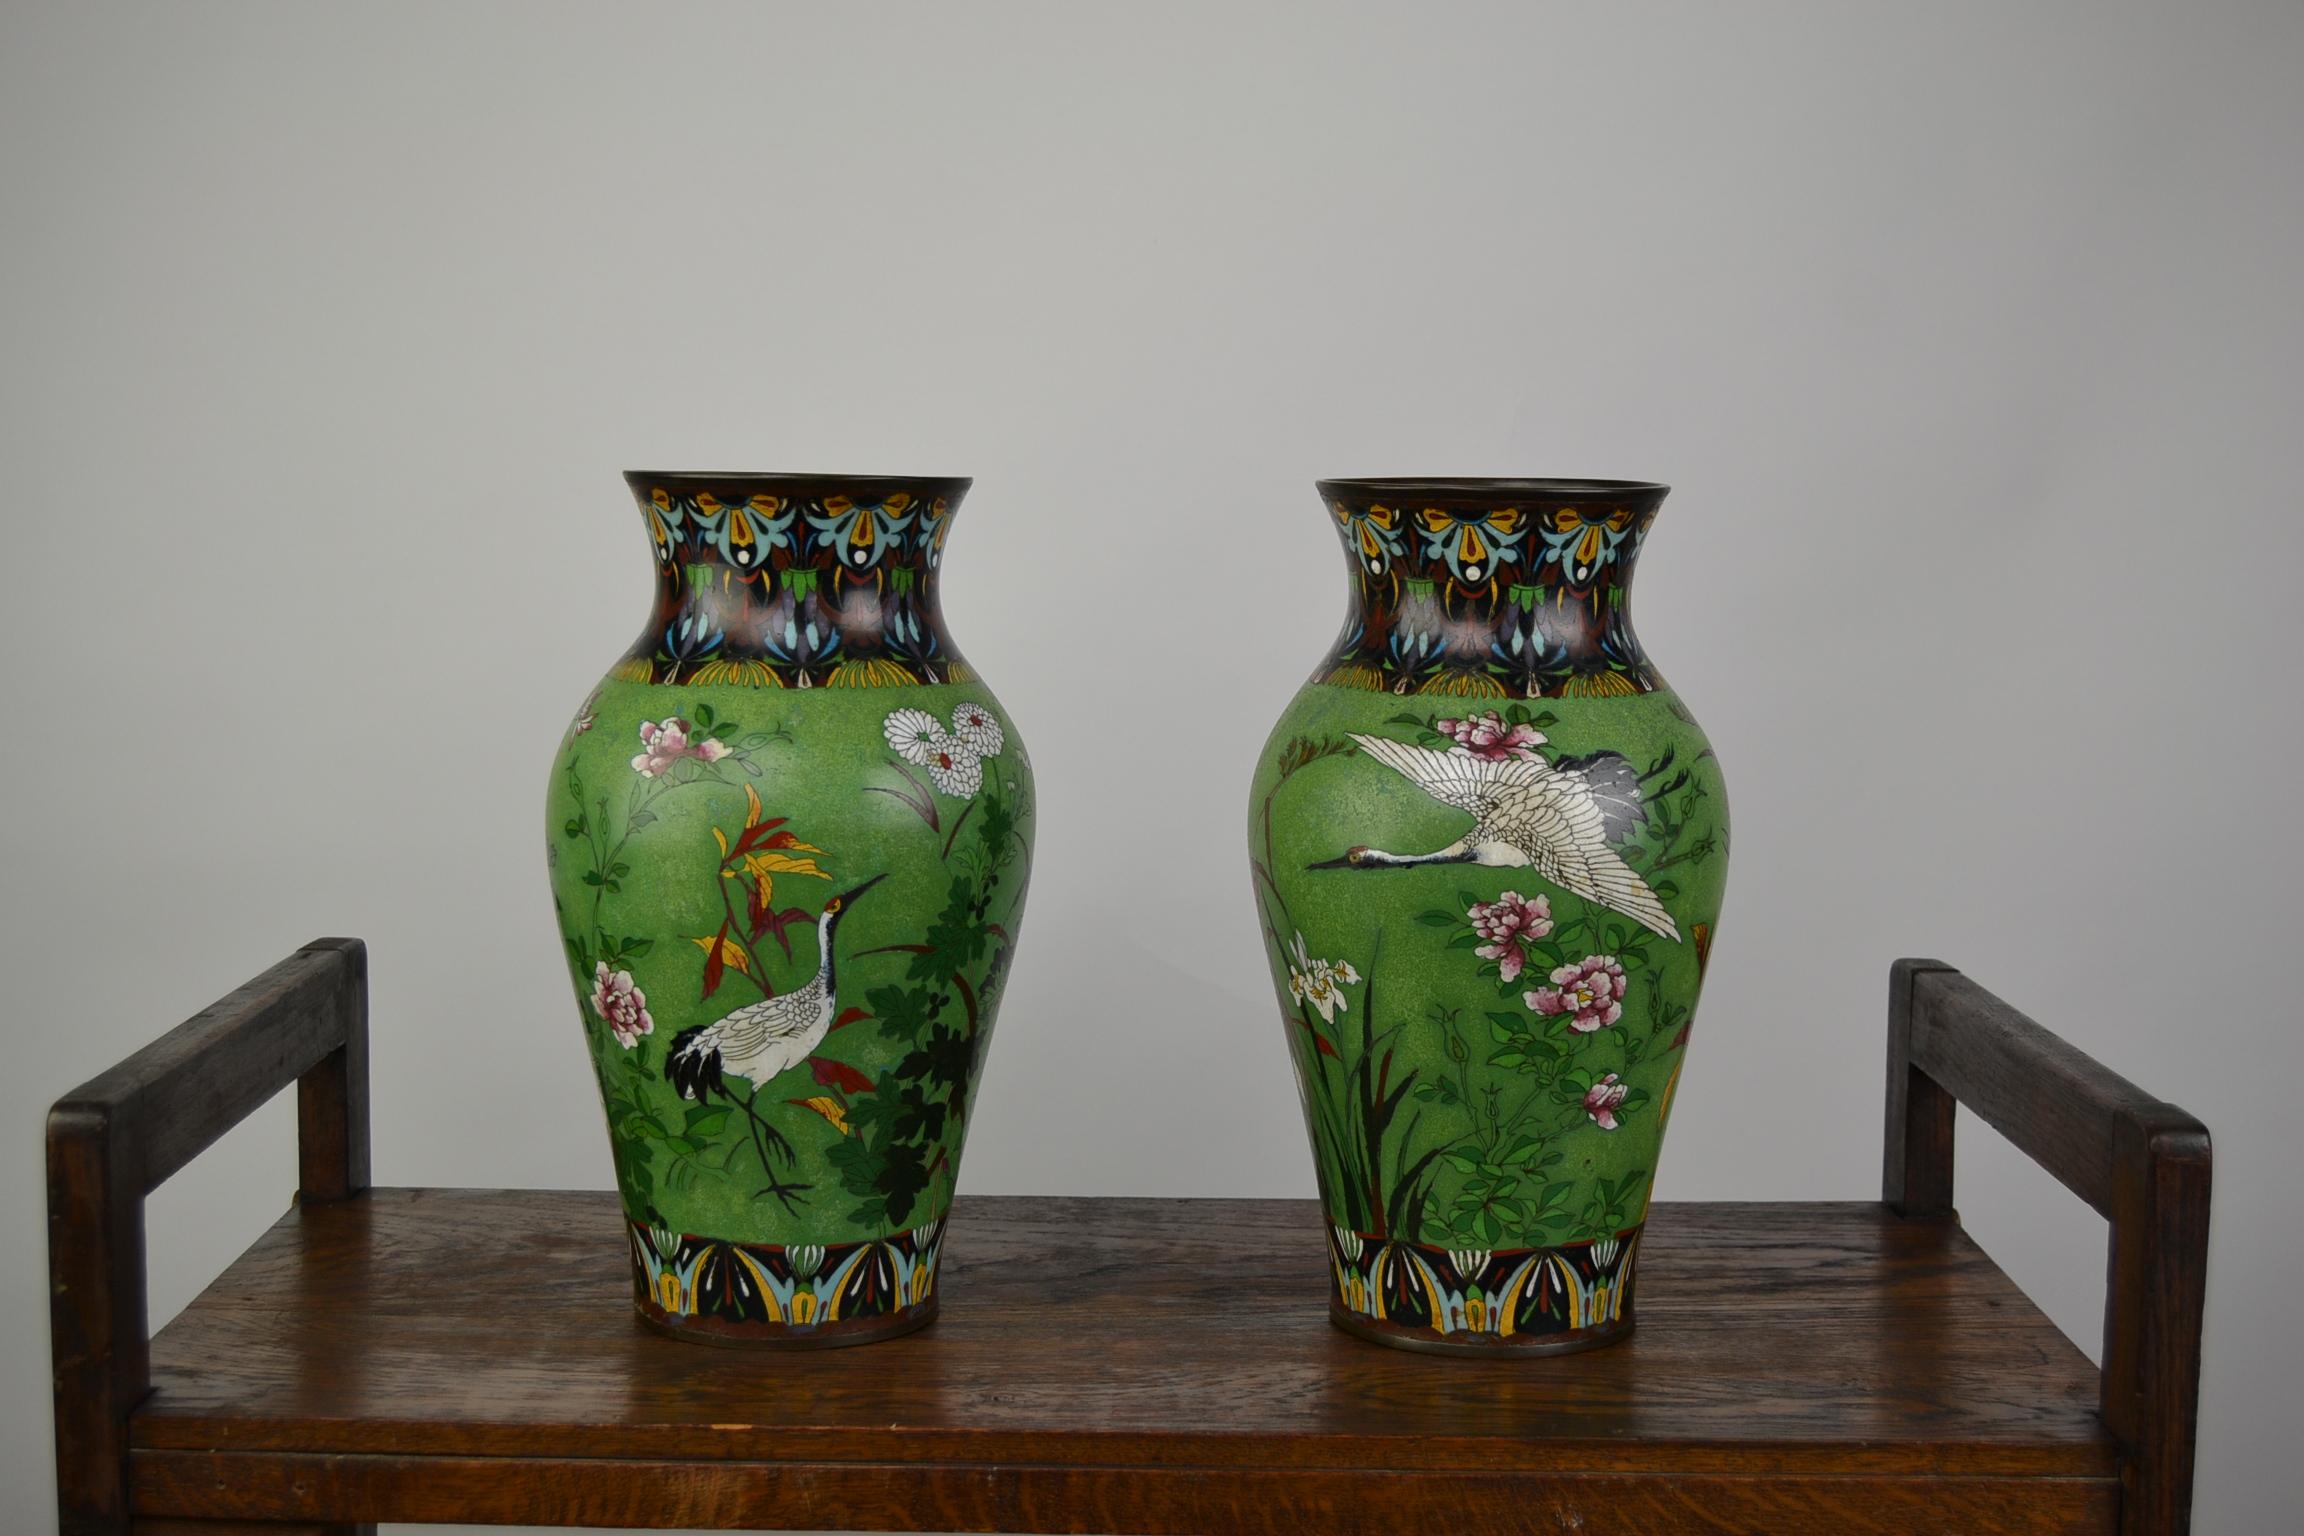 Pair of Japanese Cloisonne Enamel on Copper Vases with Crane Birds and Flowers  13